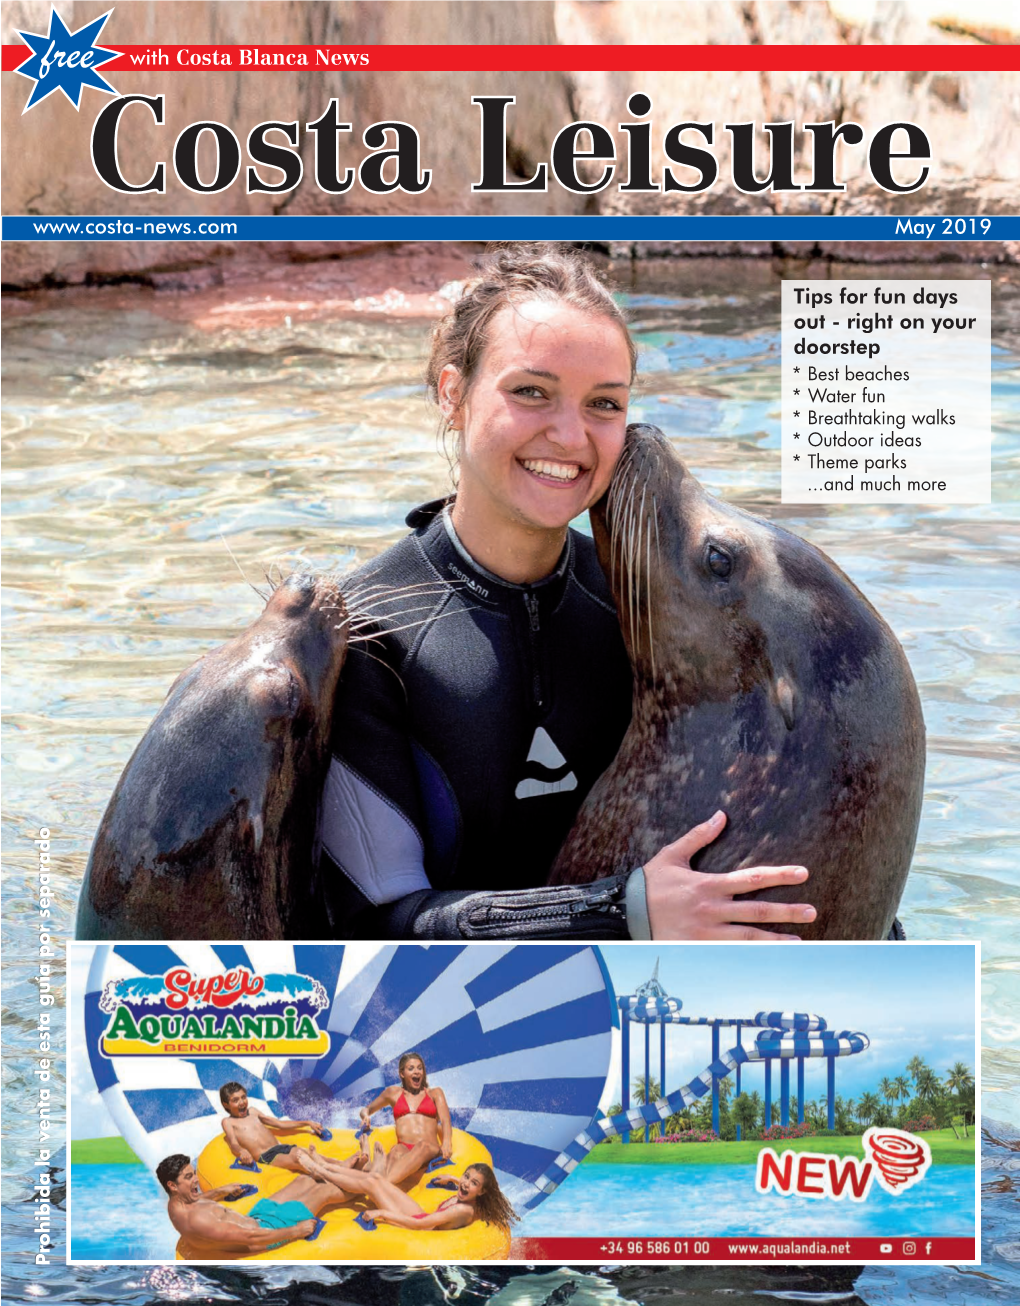 Costa Leisure COSTA NEWS, May 2019 Free with Costa Blanca News Costa Leisure May 2019